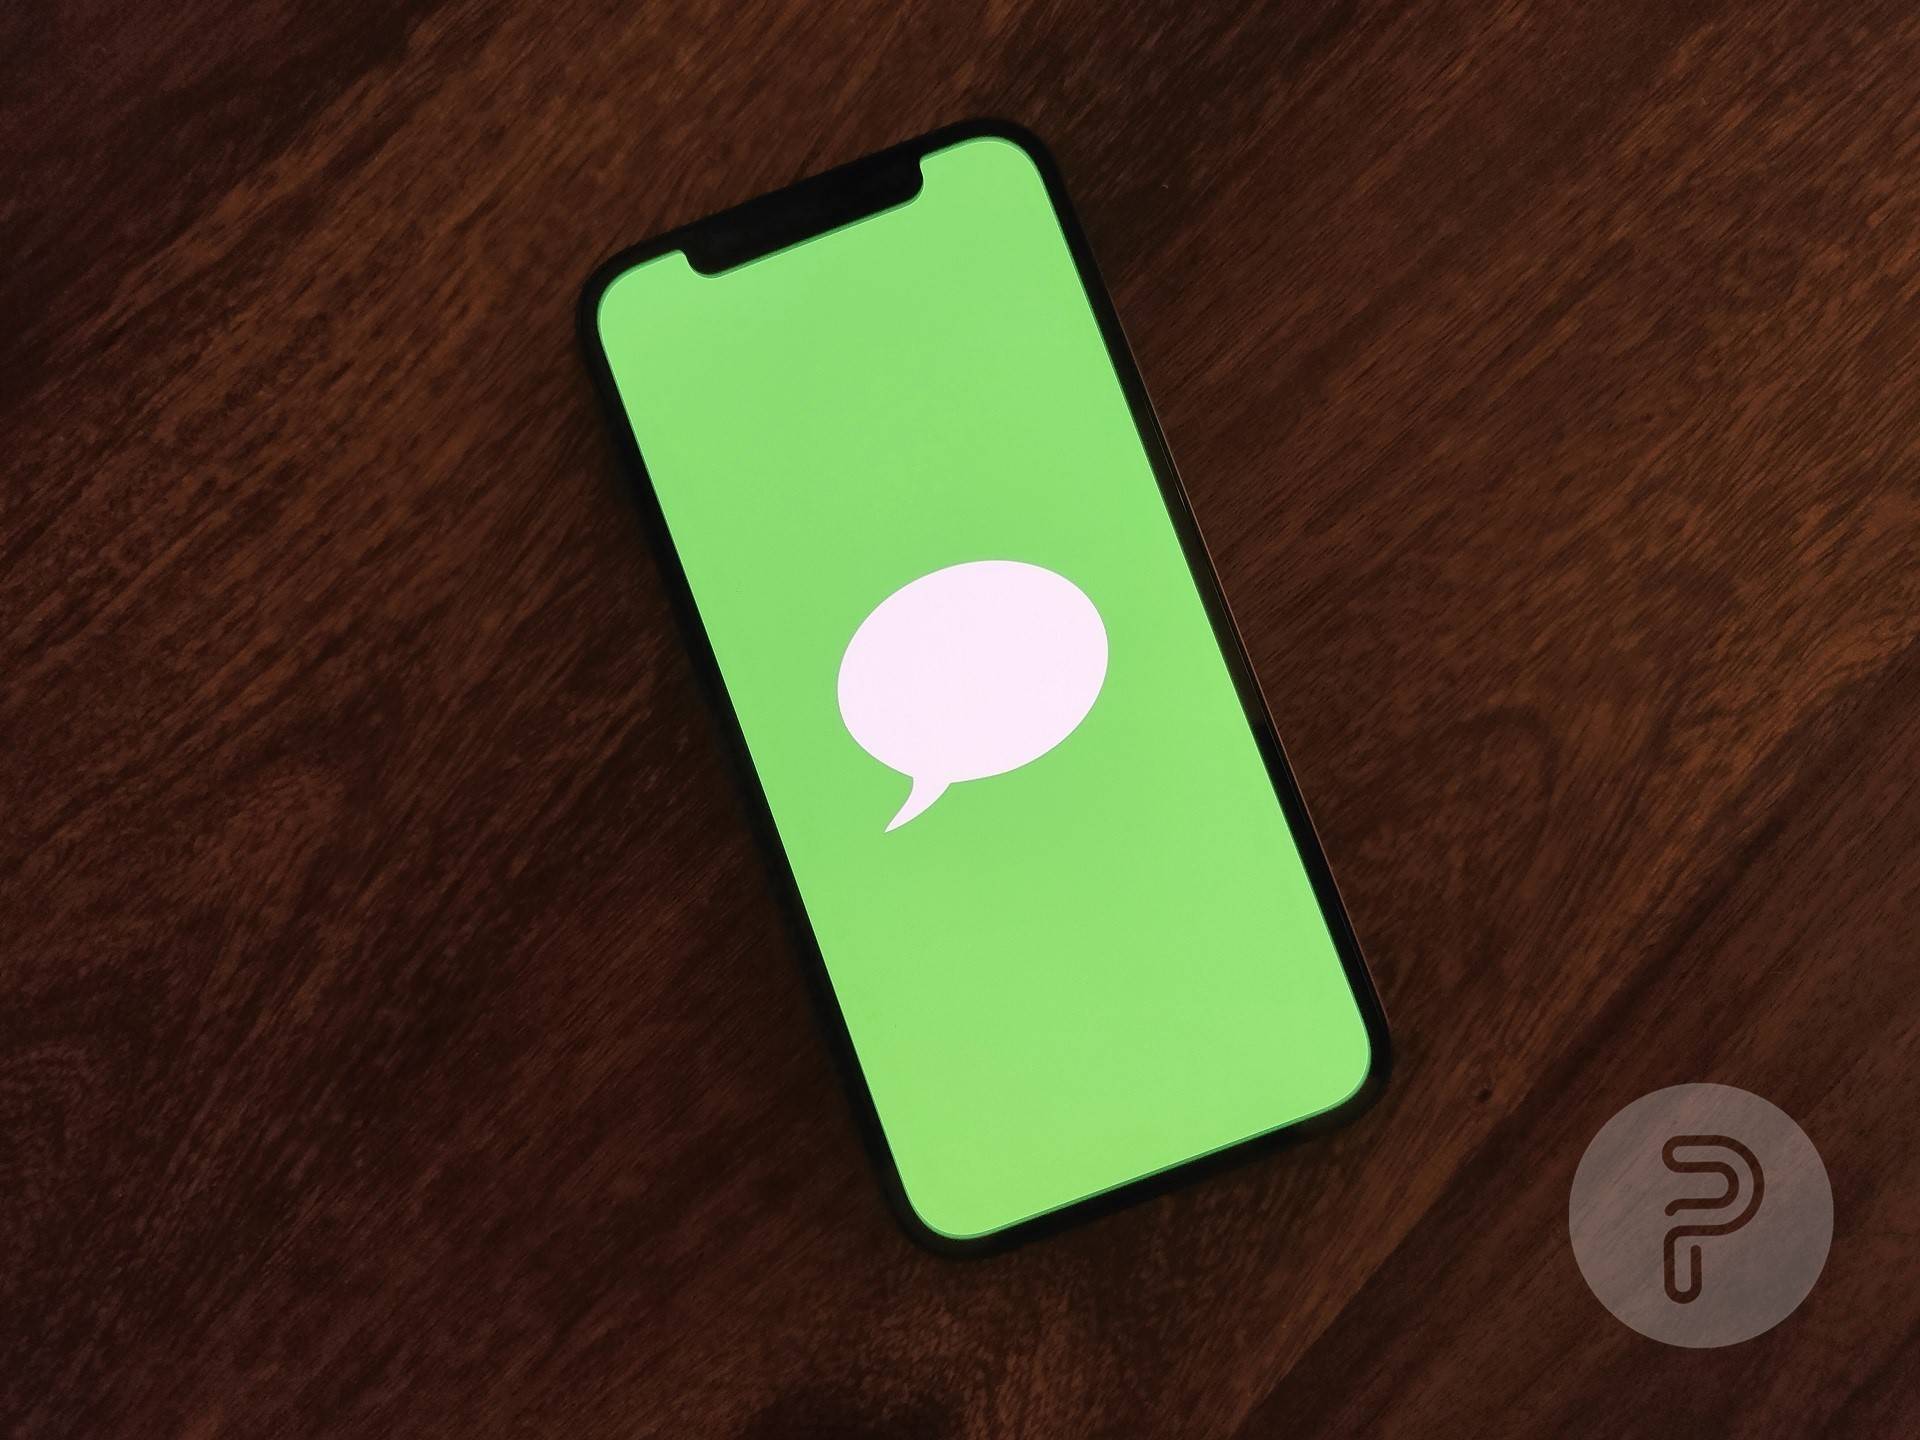 an iPhone placed on a table displaying an image with a green background and a chat bubble in the center